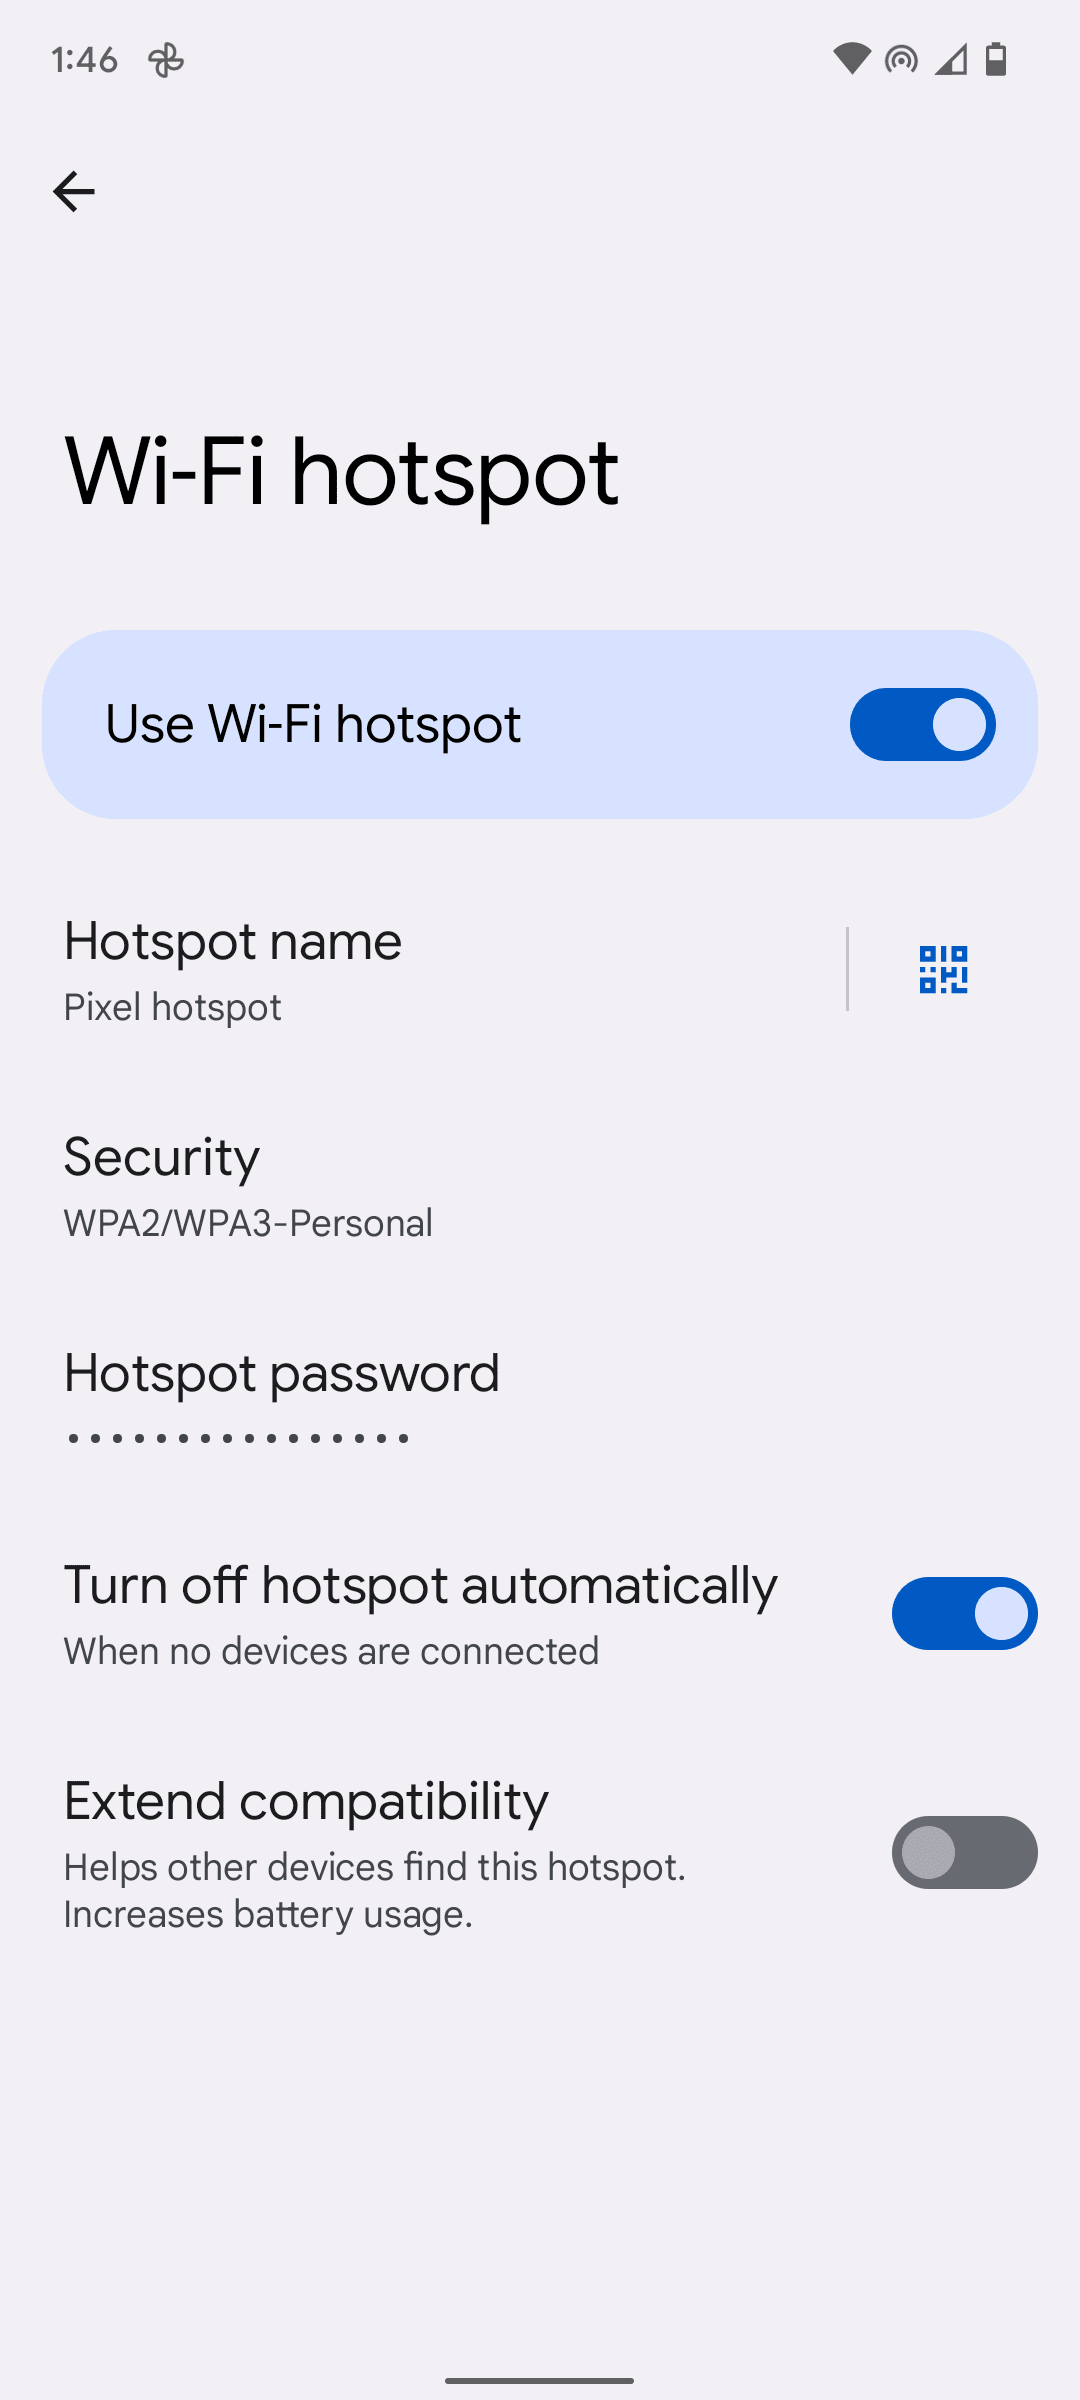 The mobile hotspot is now active. Other devices can connect to it using the hotspot name (step 7) and password (step 10).